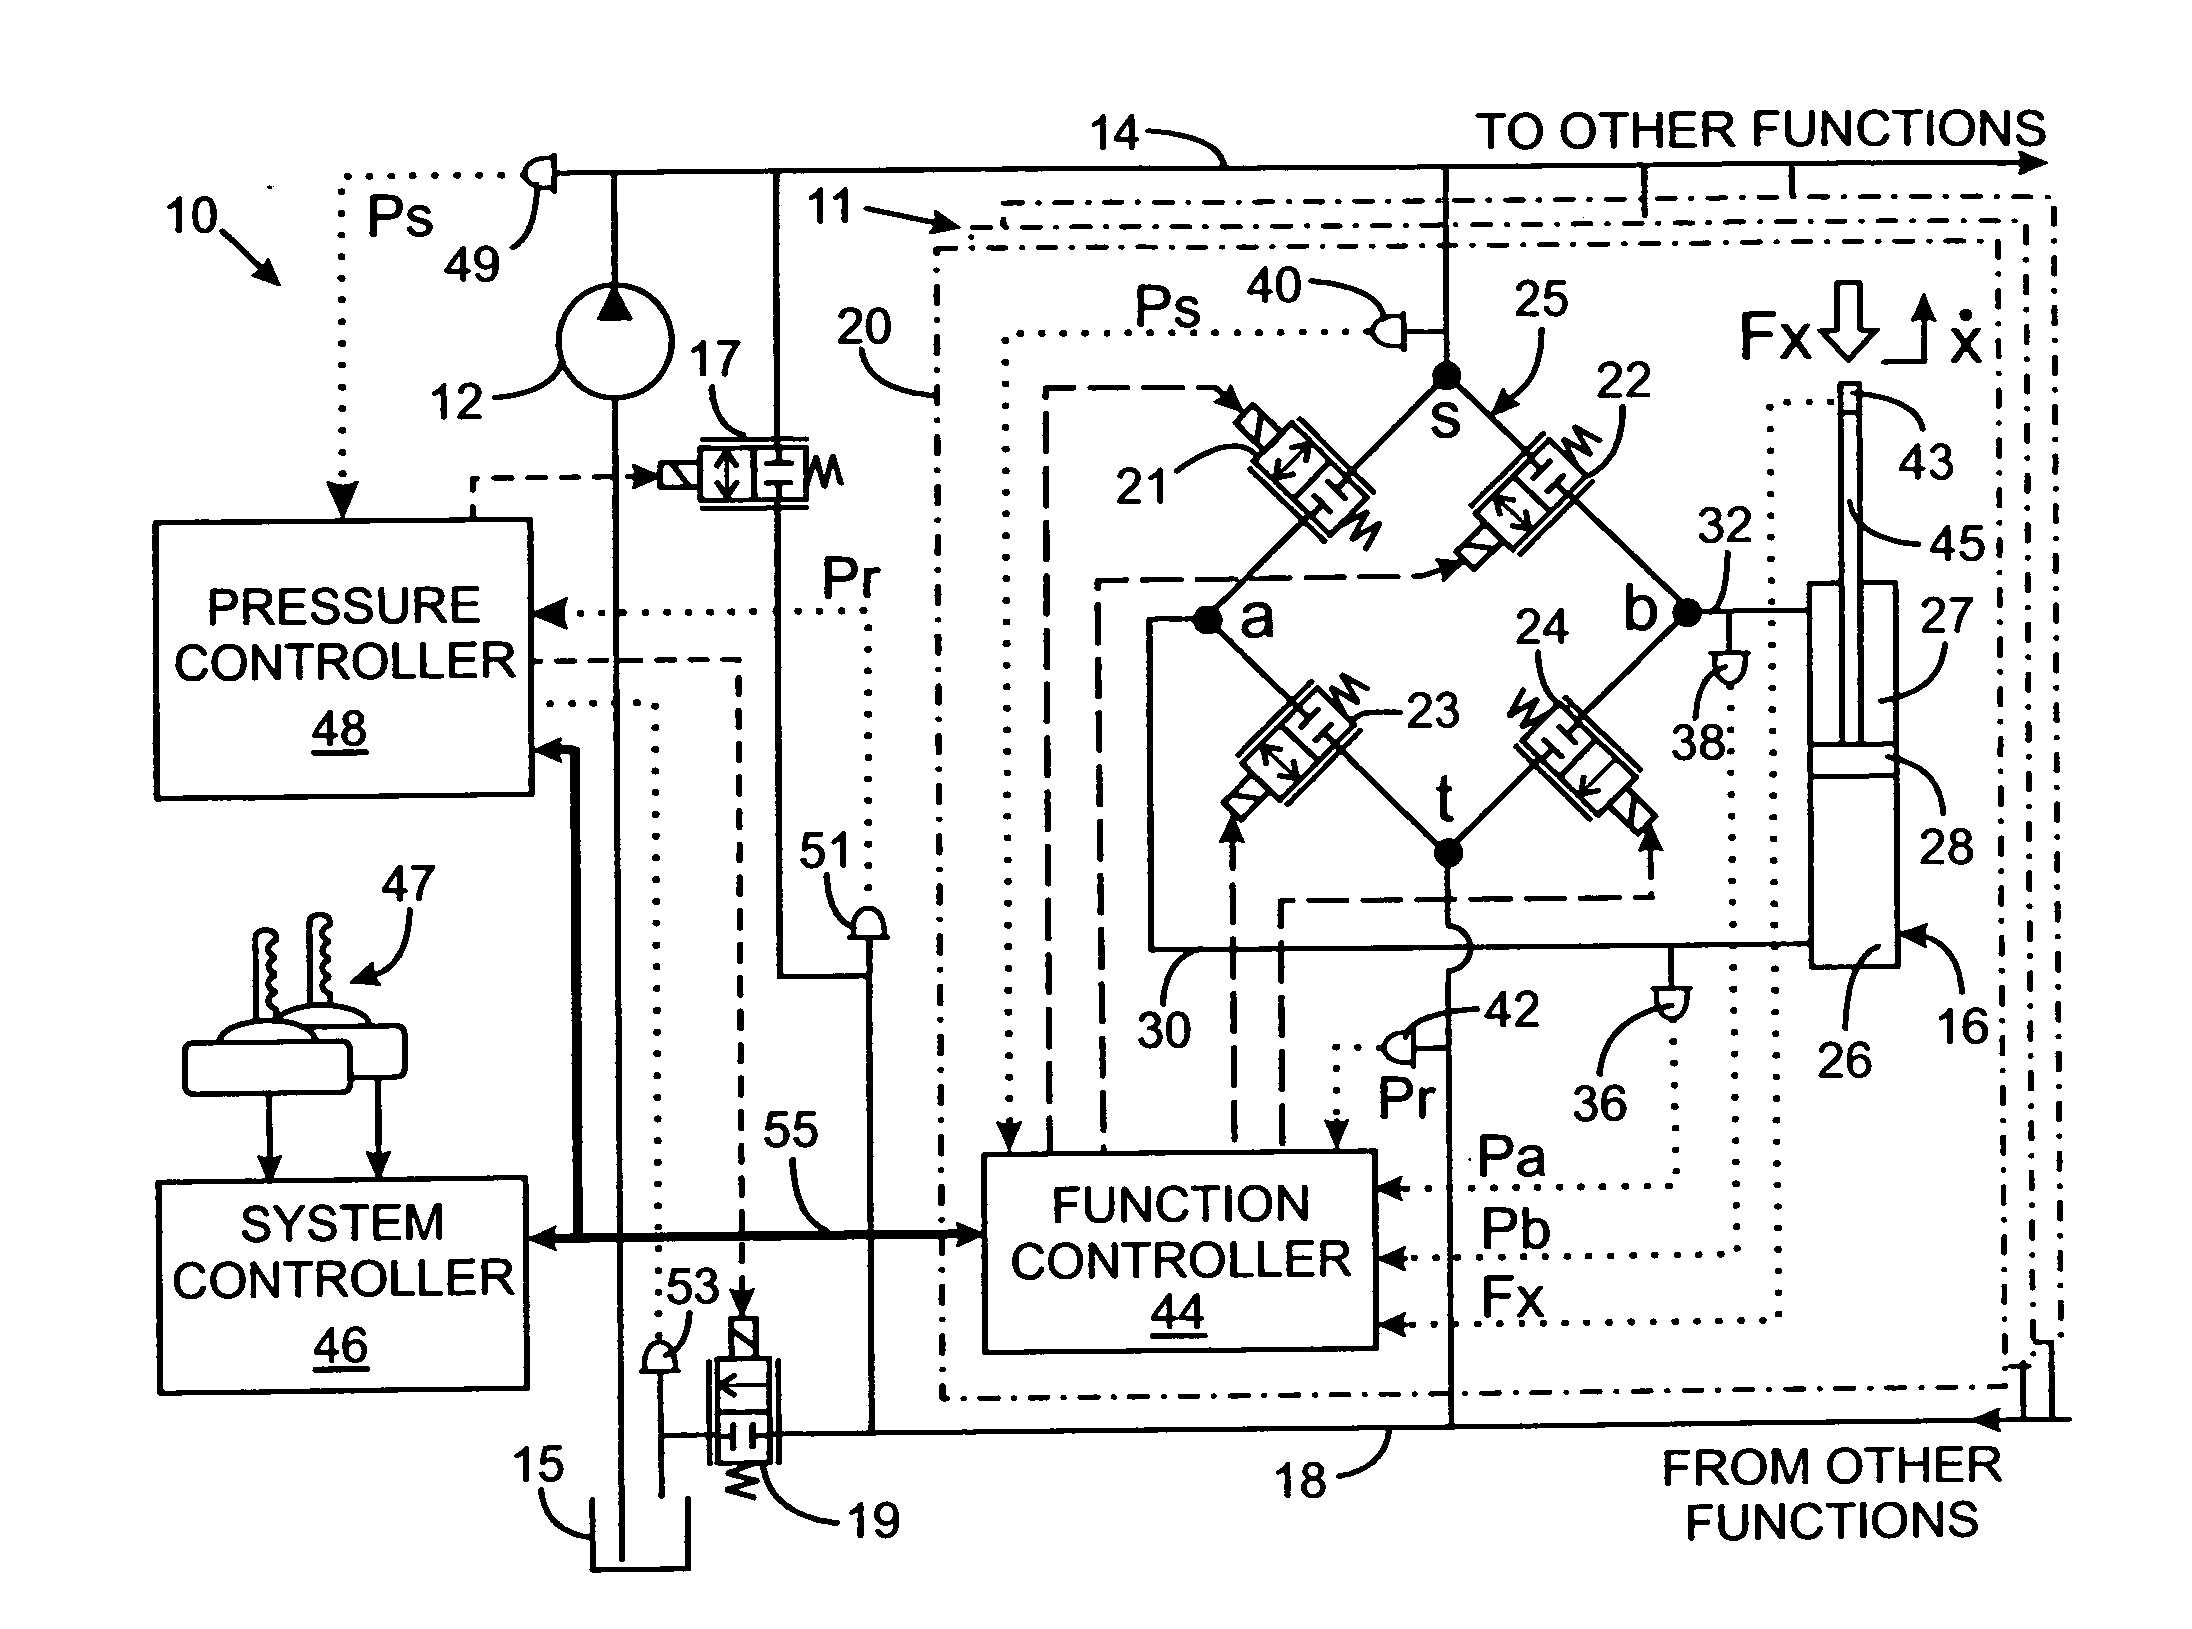 Hydraulic metering mode transitioning technique for a velocity based control system